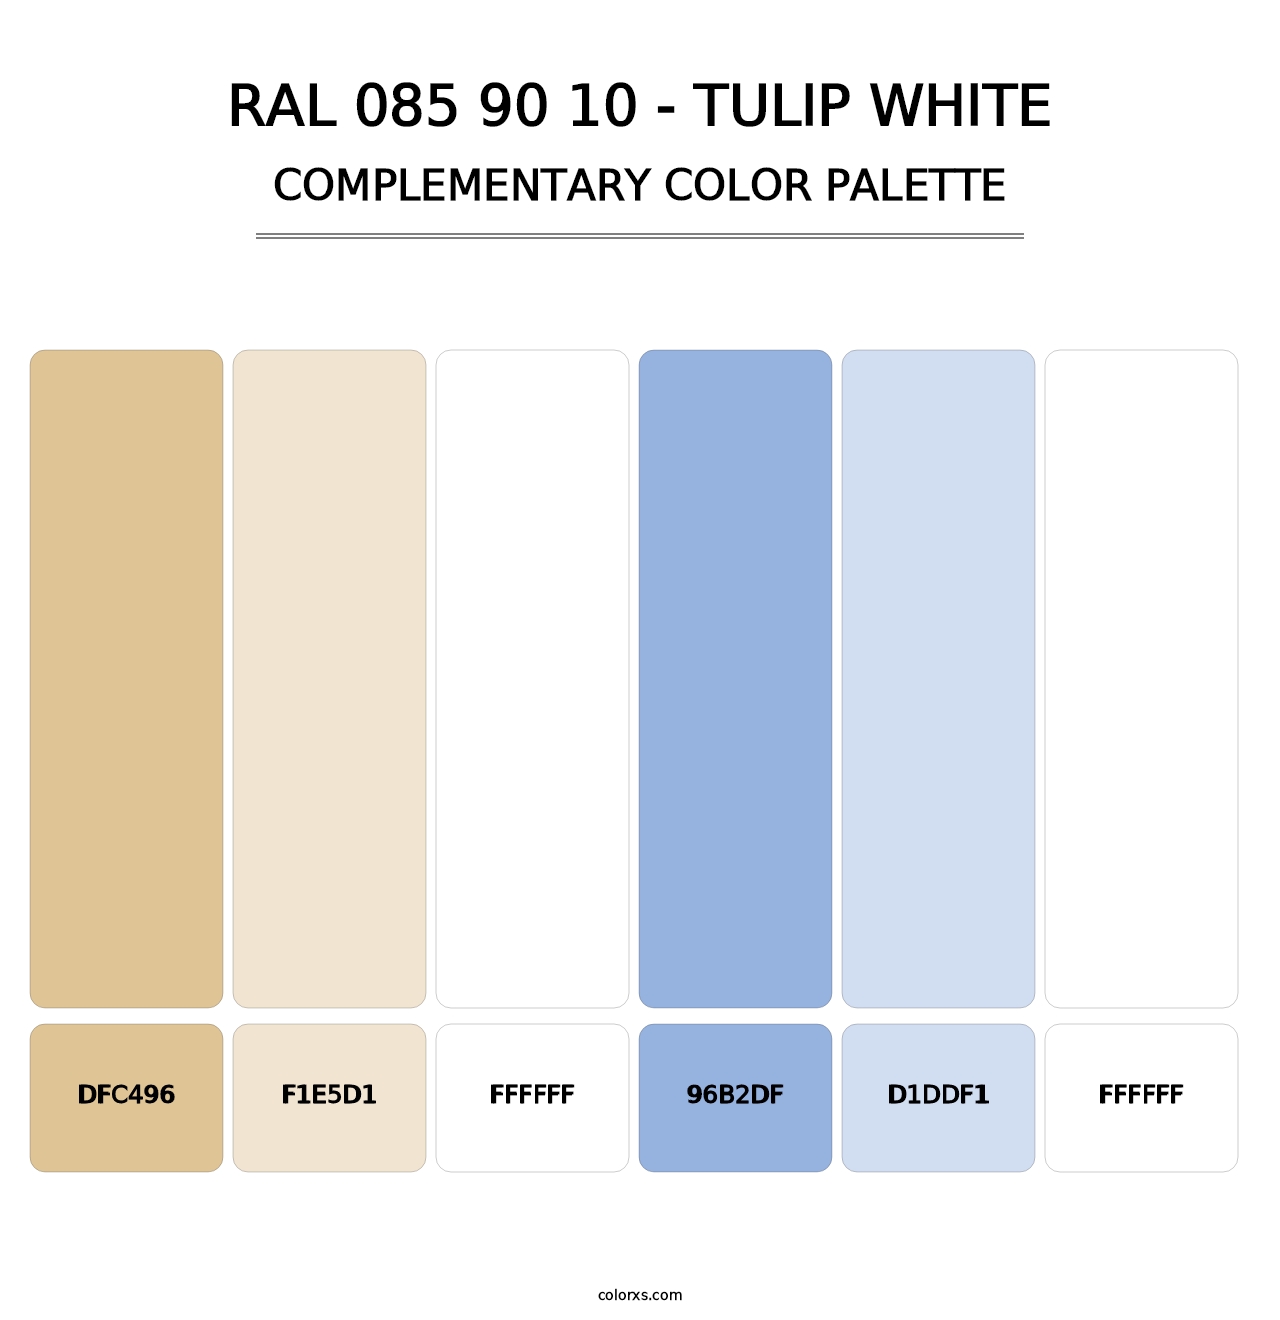 RAL 085 90 10 - Tulip White - Complementary Color Palette